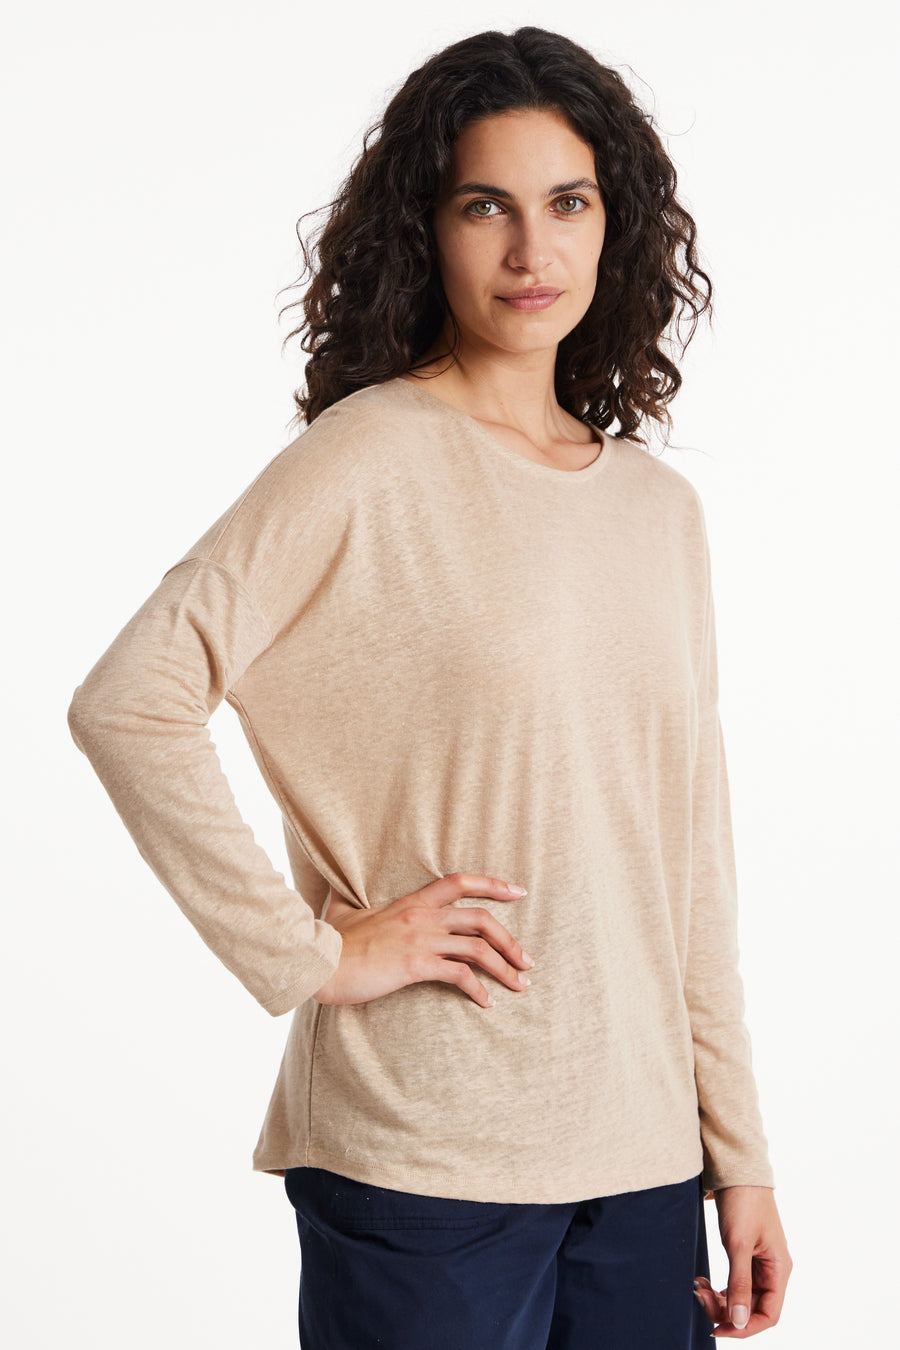 People Tree Fair Trade, Ethical & Sustainable Nerissa Linen Top in Sand 100% organic certified linen